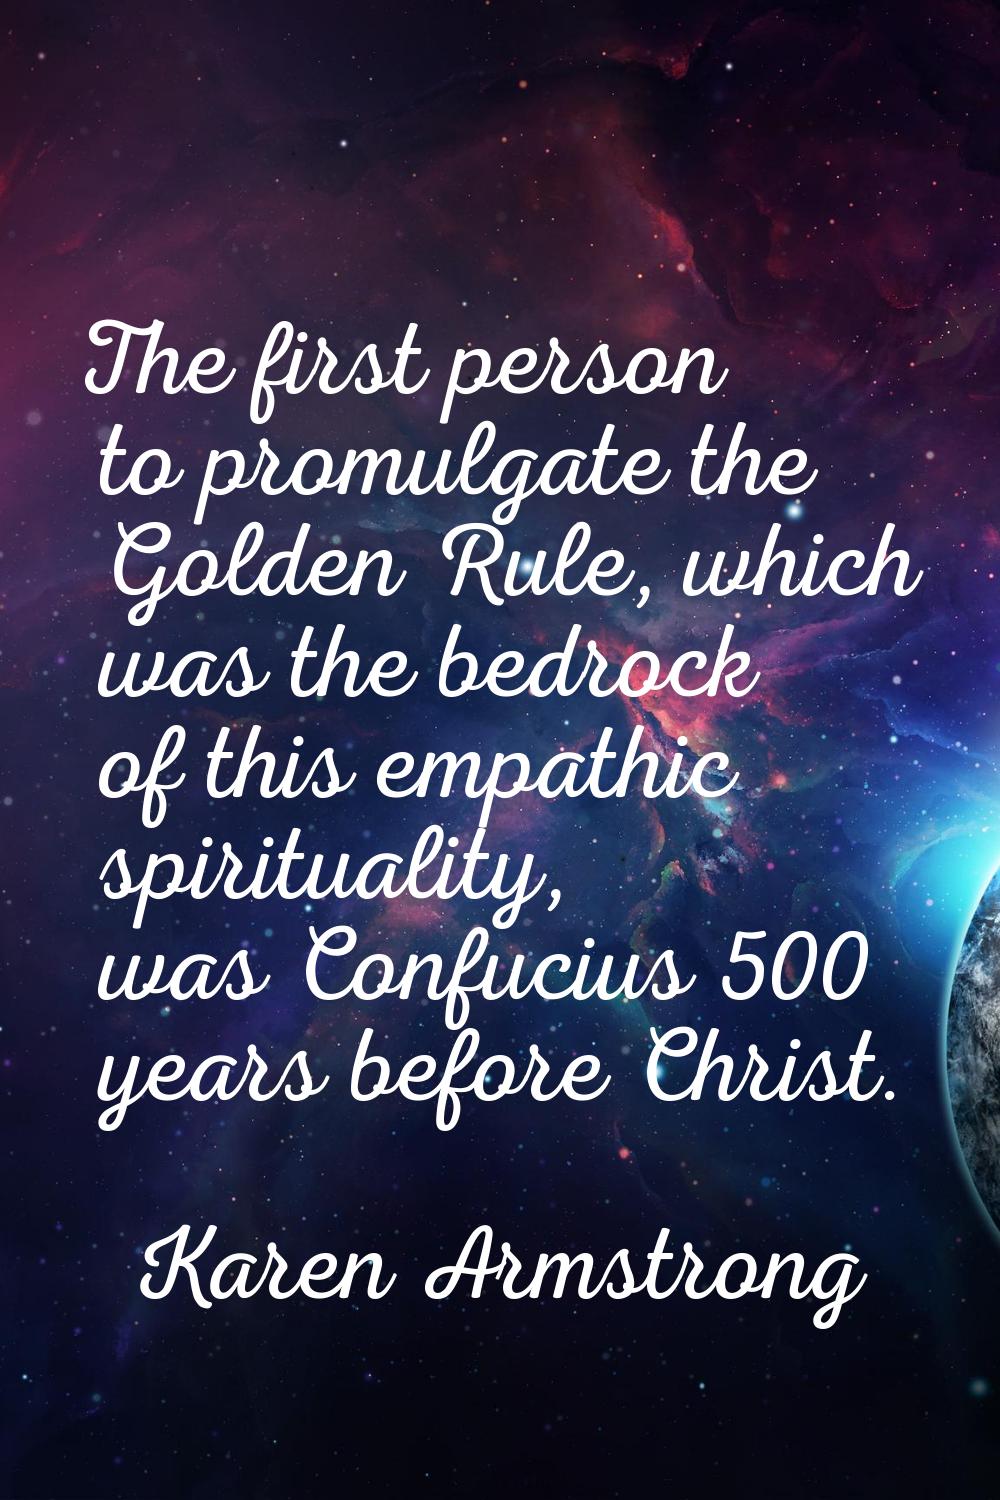 The first person to promulgate the Golden Rule, which was the bedrock of this empathic spirituality